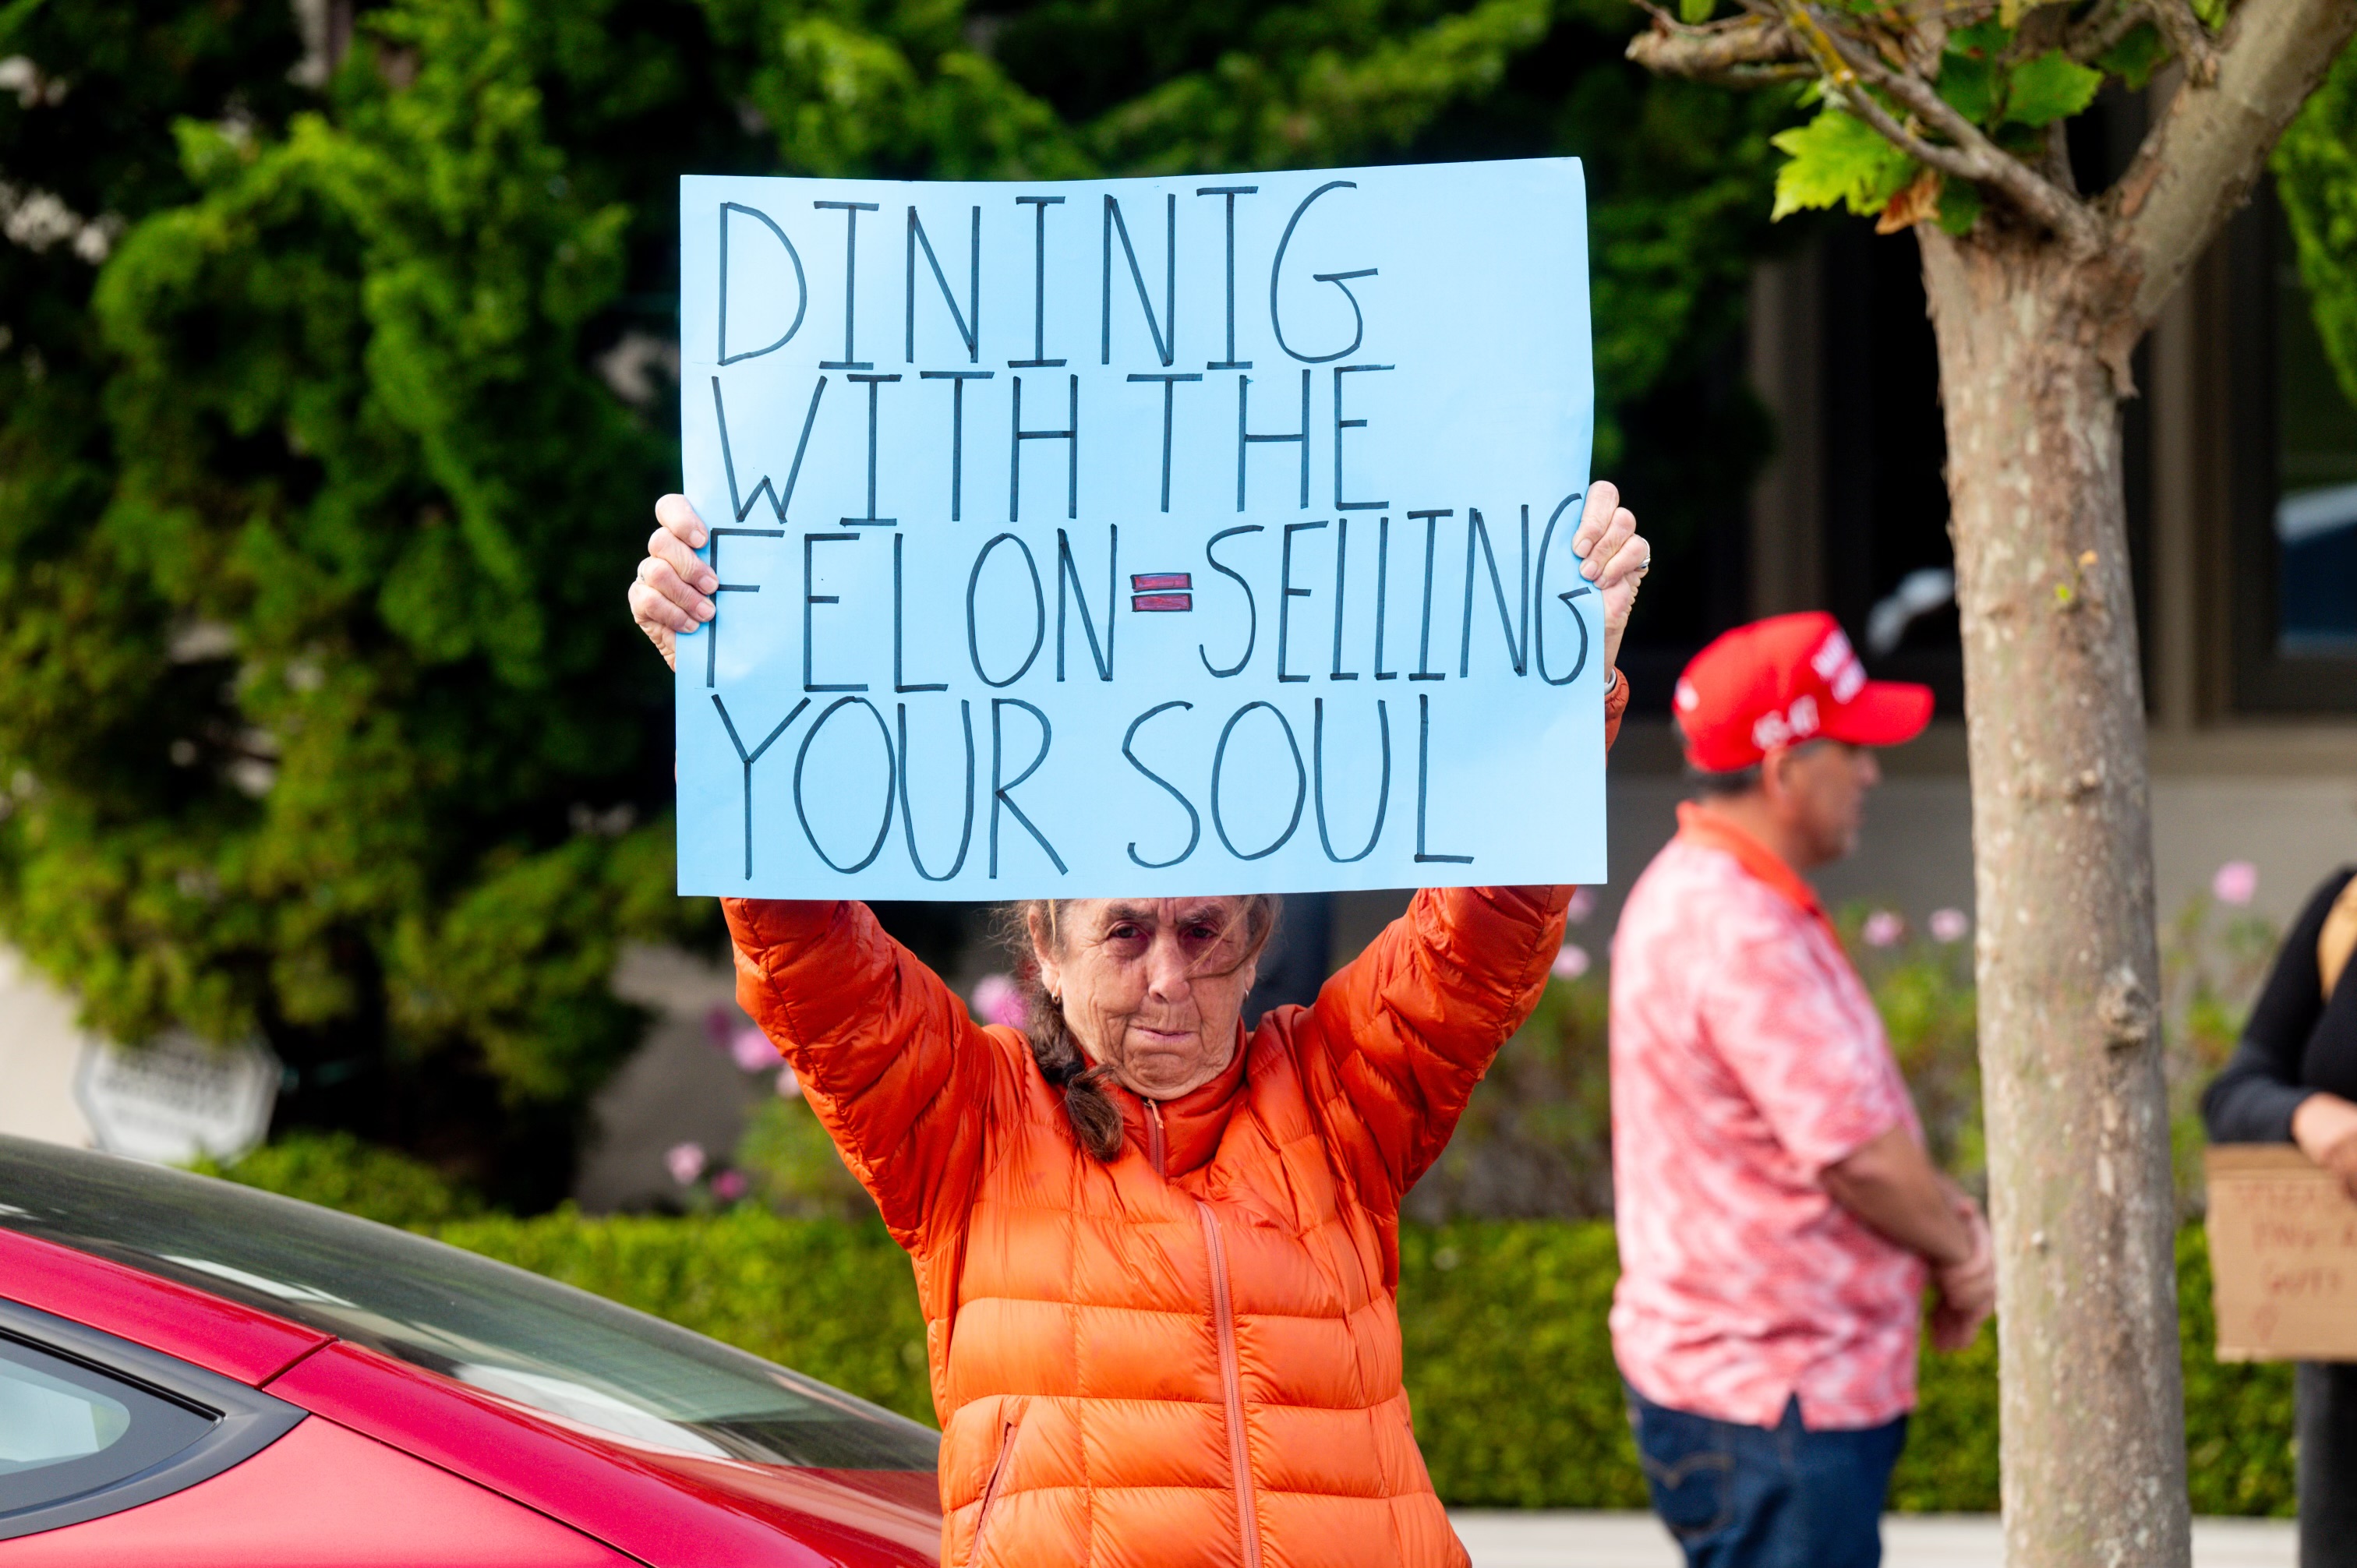 A person in an orange jacket holds a sign saying &quot;DINING WITH THE FELON = SELLING YOUR SOUL&quot; while standing outside, with others in the background.